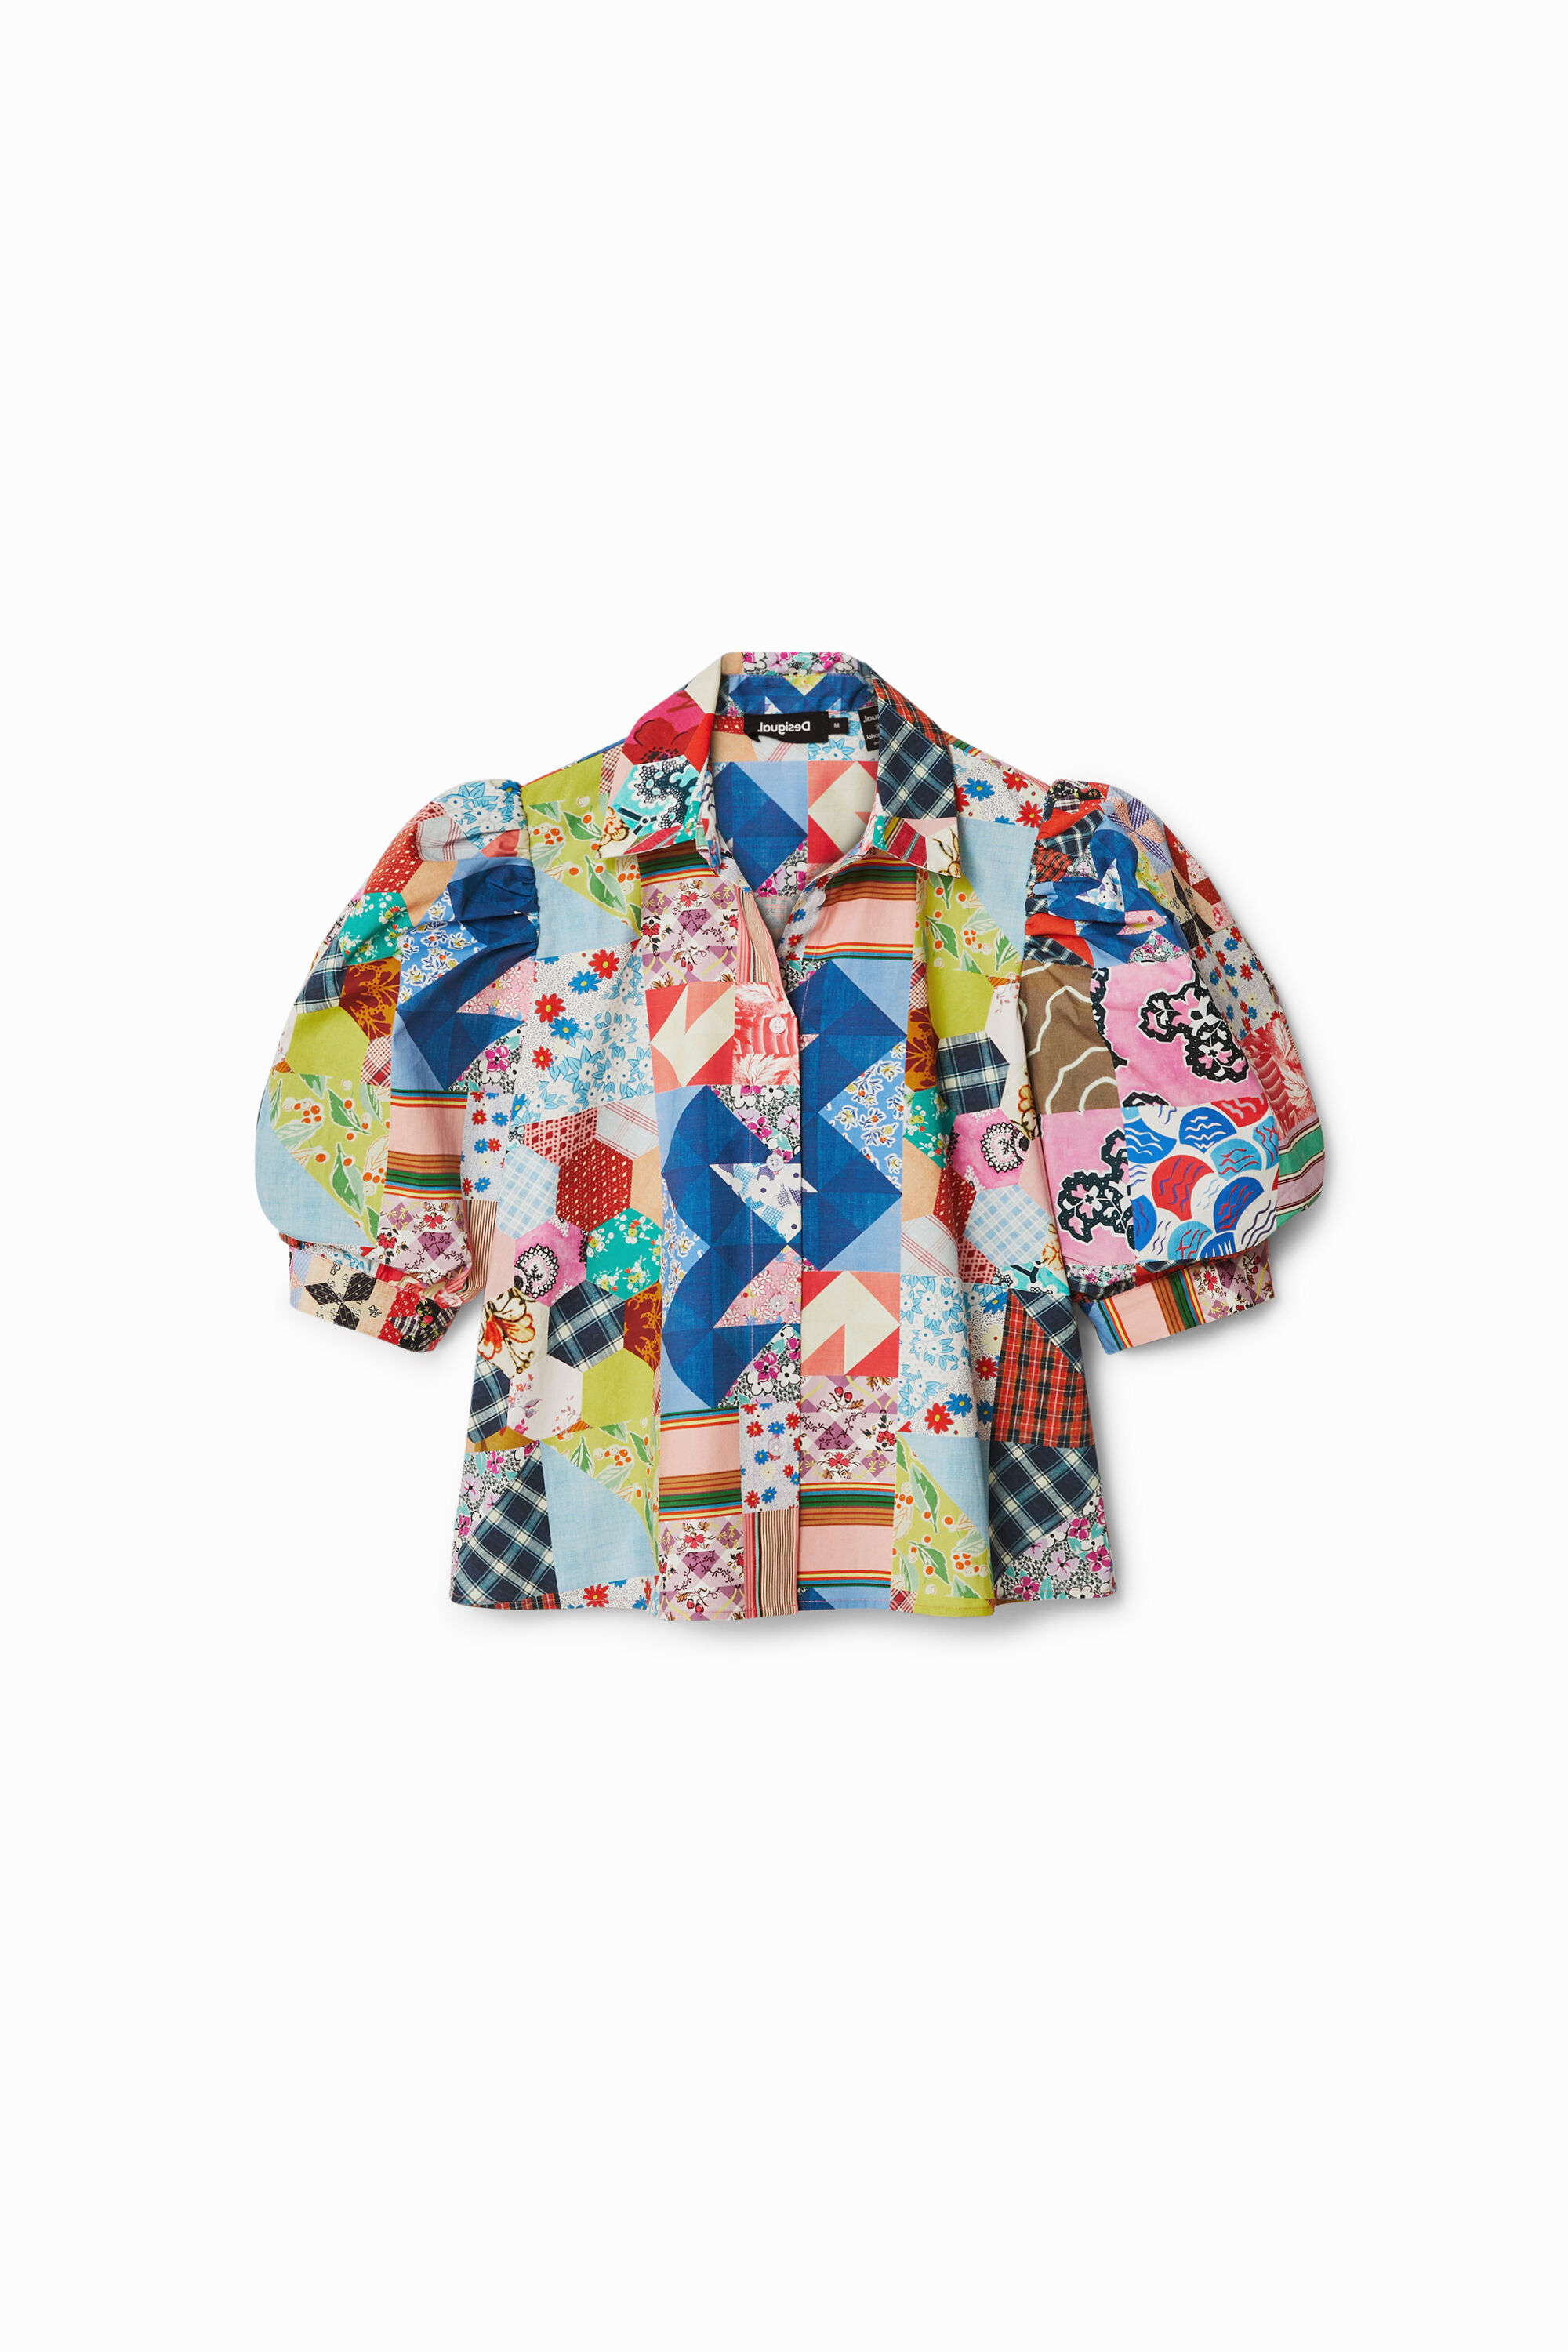 Desigual Johnson Hartig Patchwork Shirt In Material Finishes